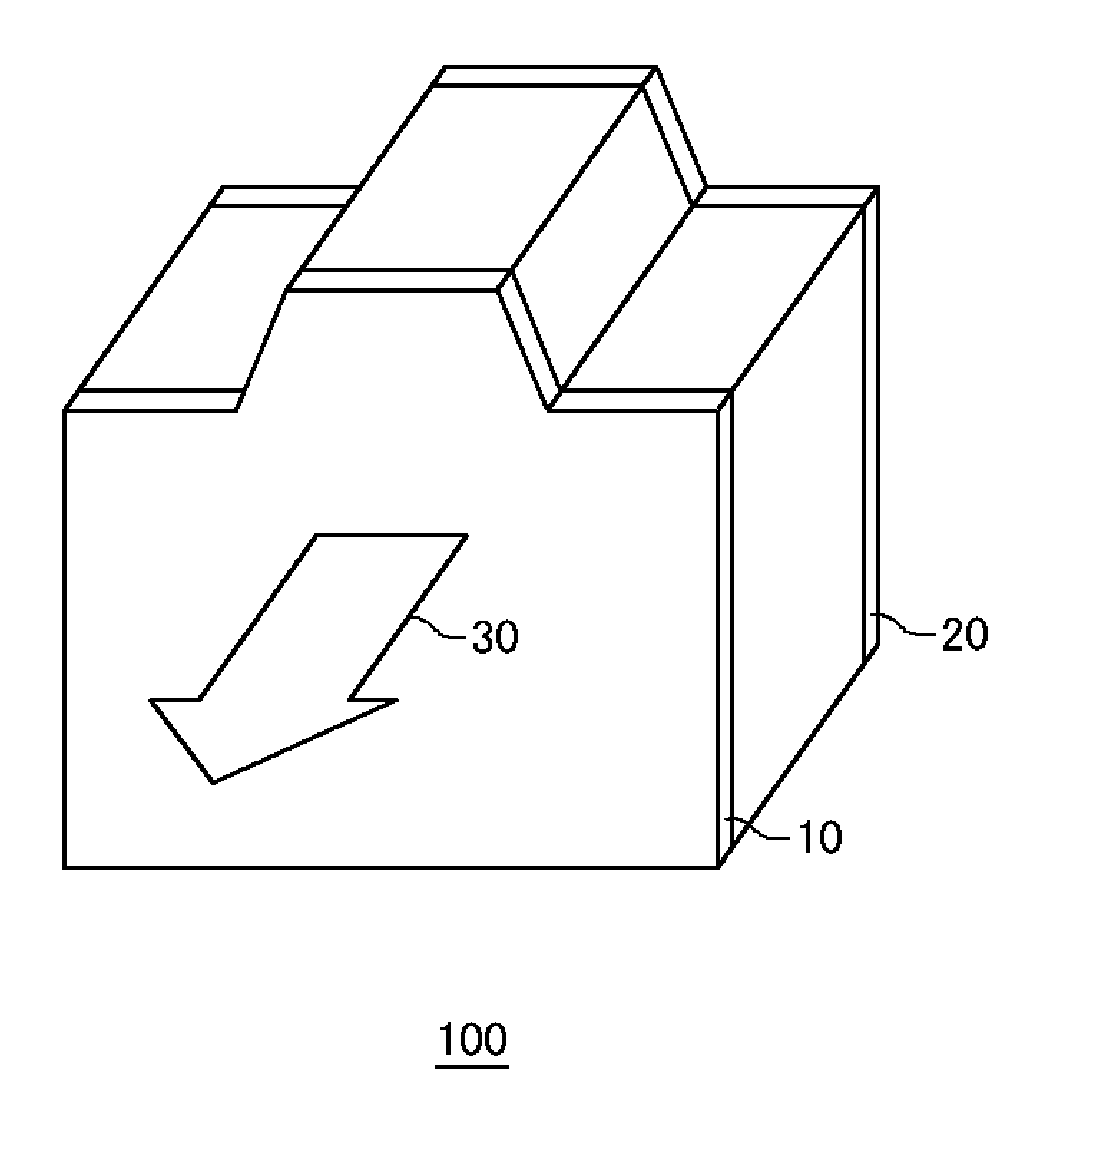 Semiconductor light device and manufacturing method for the same